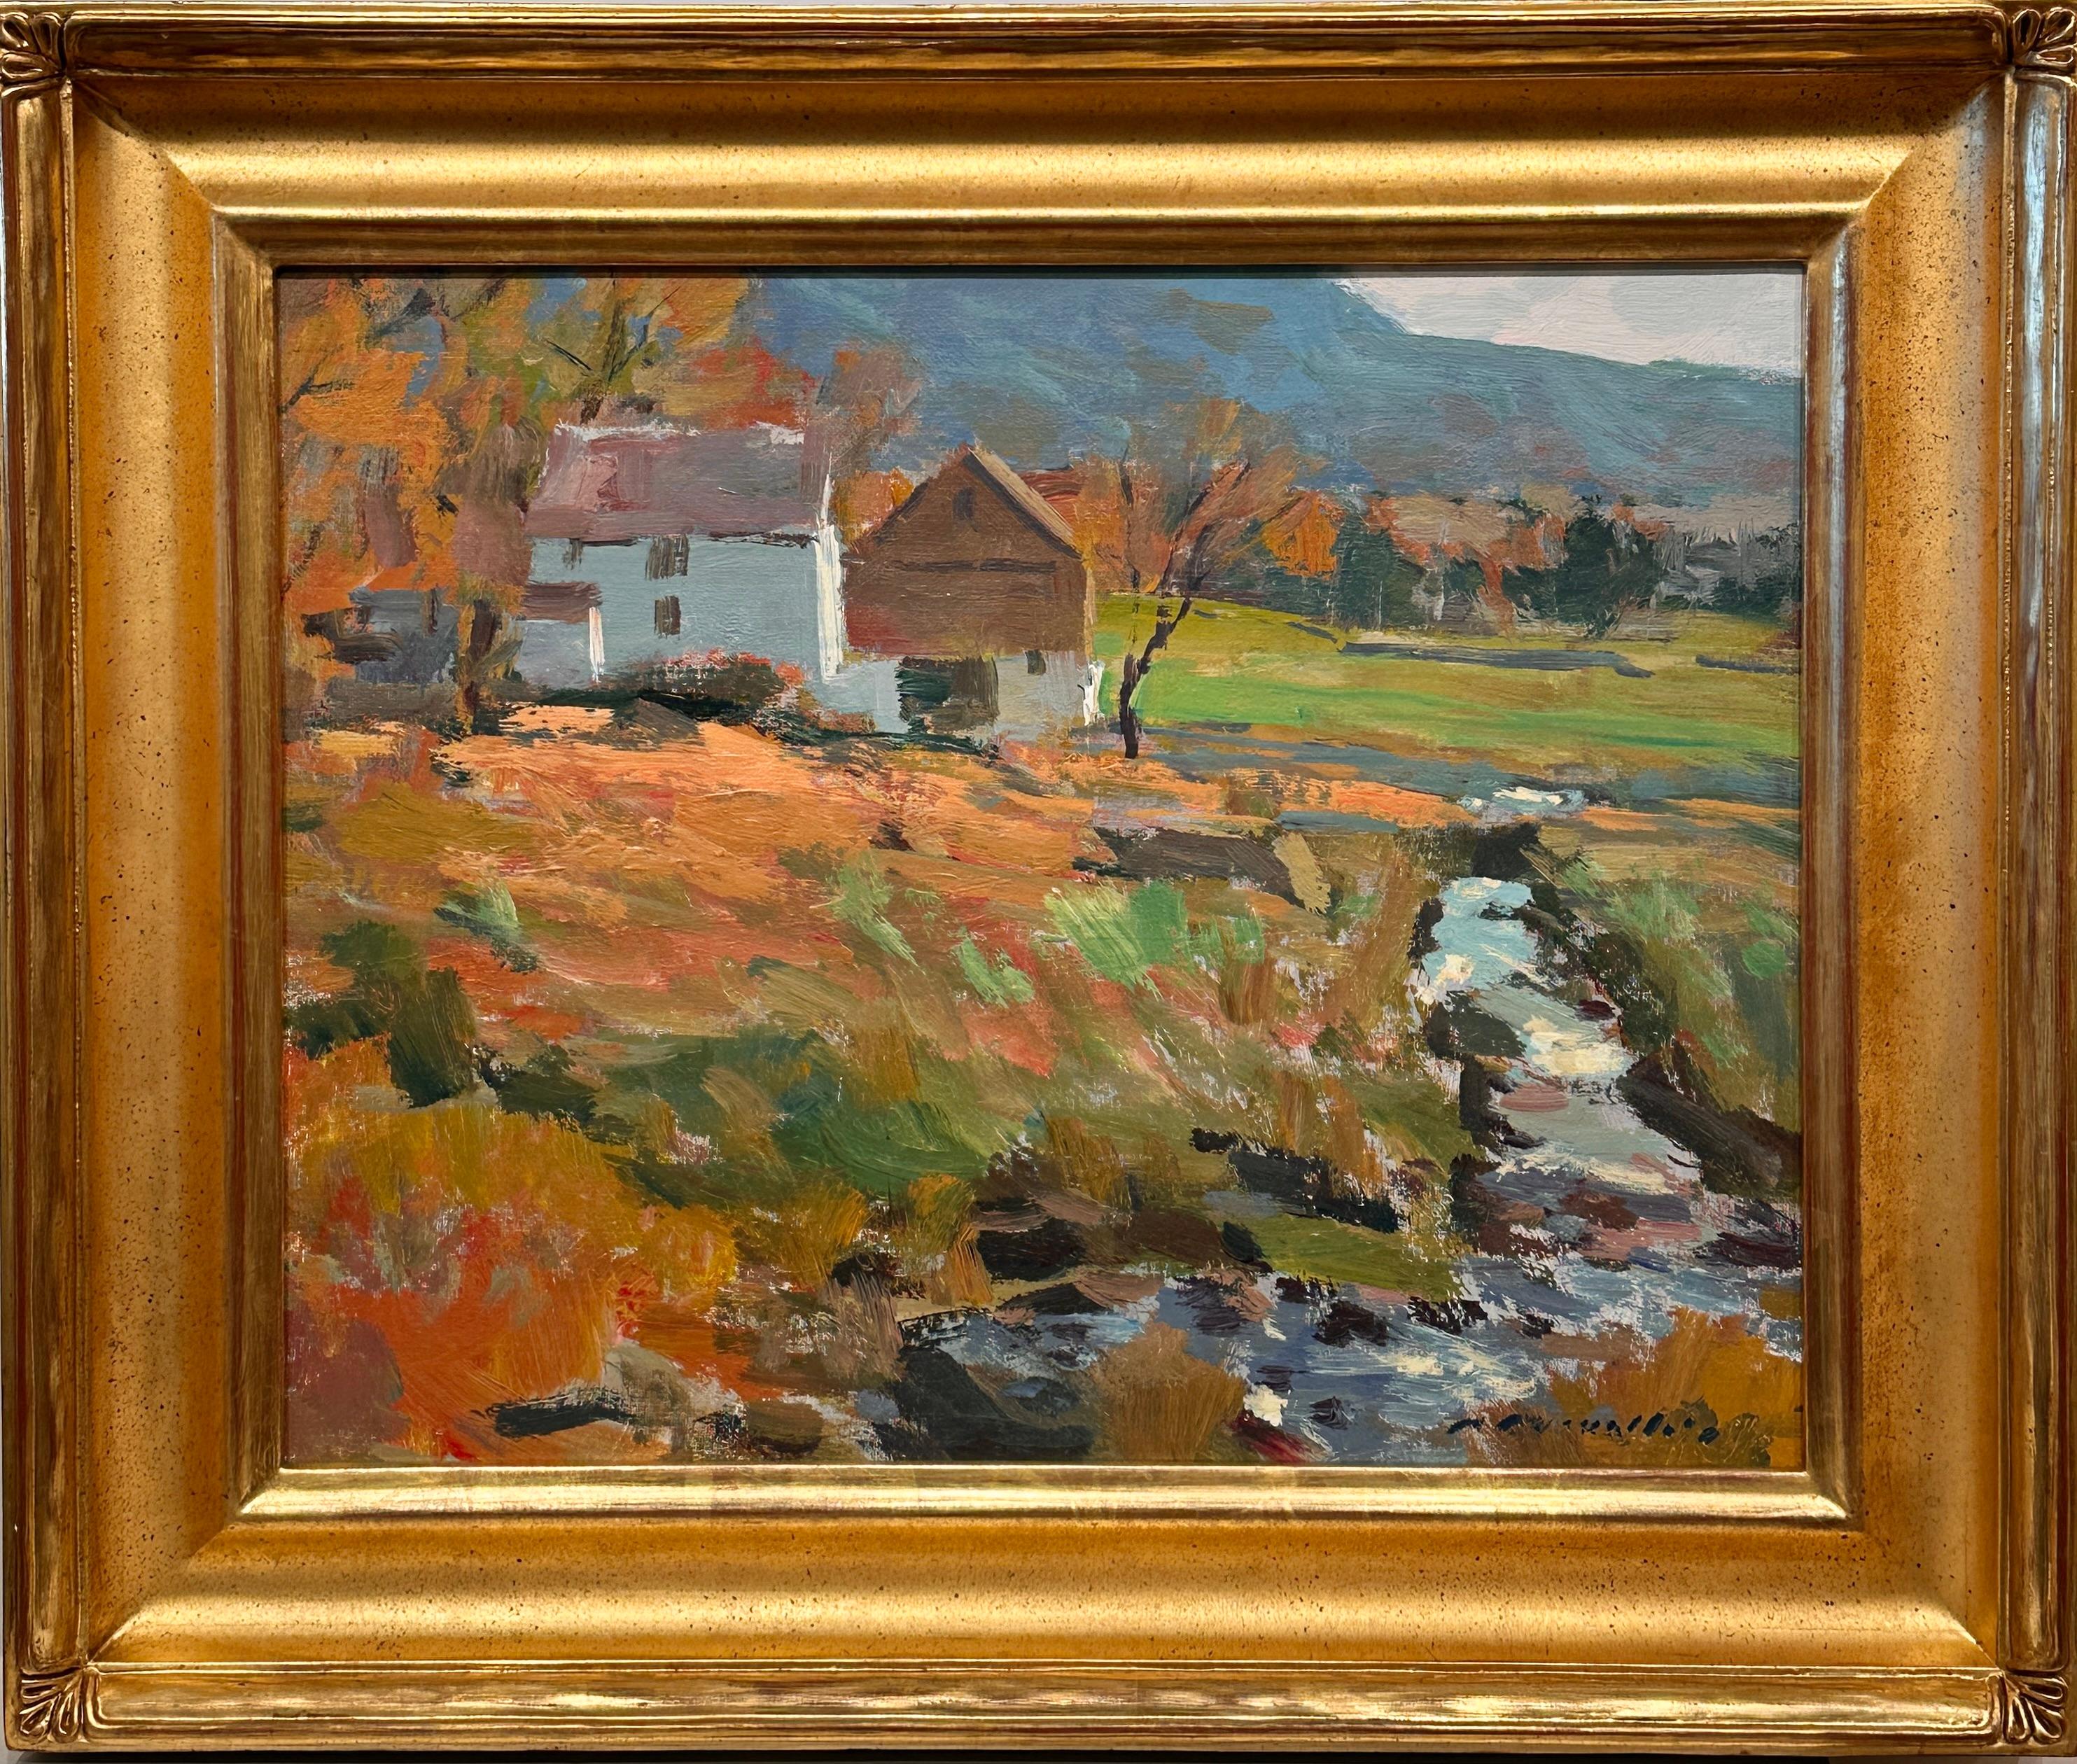 Charles Movalli (1945-2016)
Charles Movalli (1945–2016) had a BA from Clark University and a PhD from the University of Connecticut. He painted and wrote about art for over thirty years. He belonged to the North Shore Arts Association, the Rockport